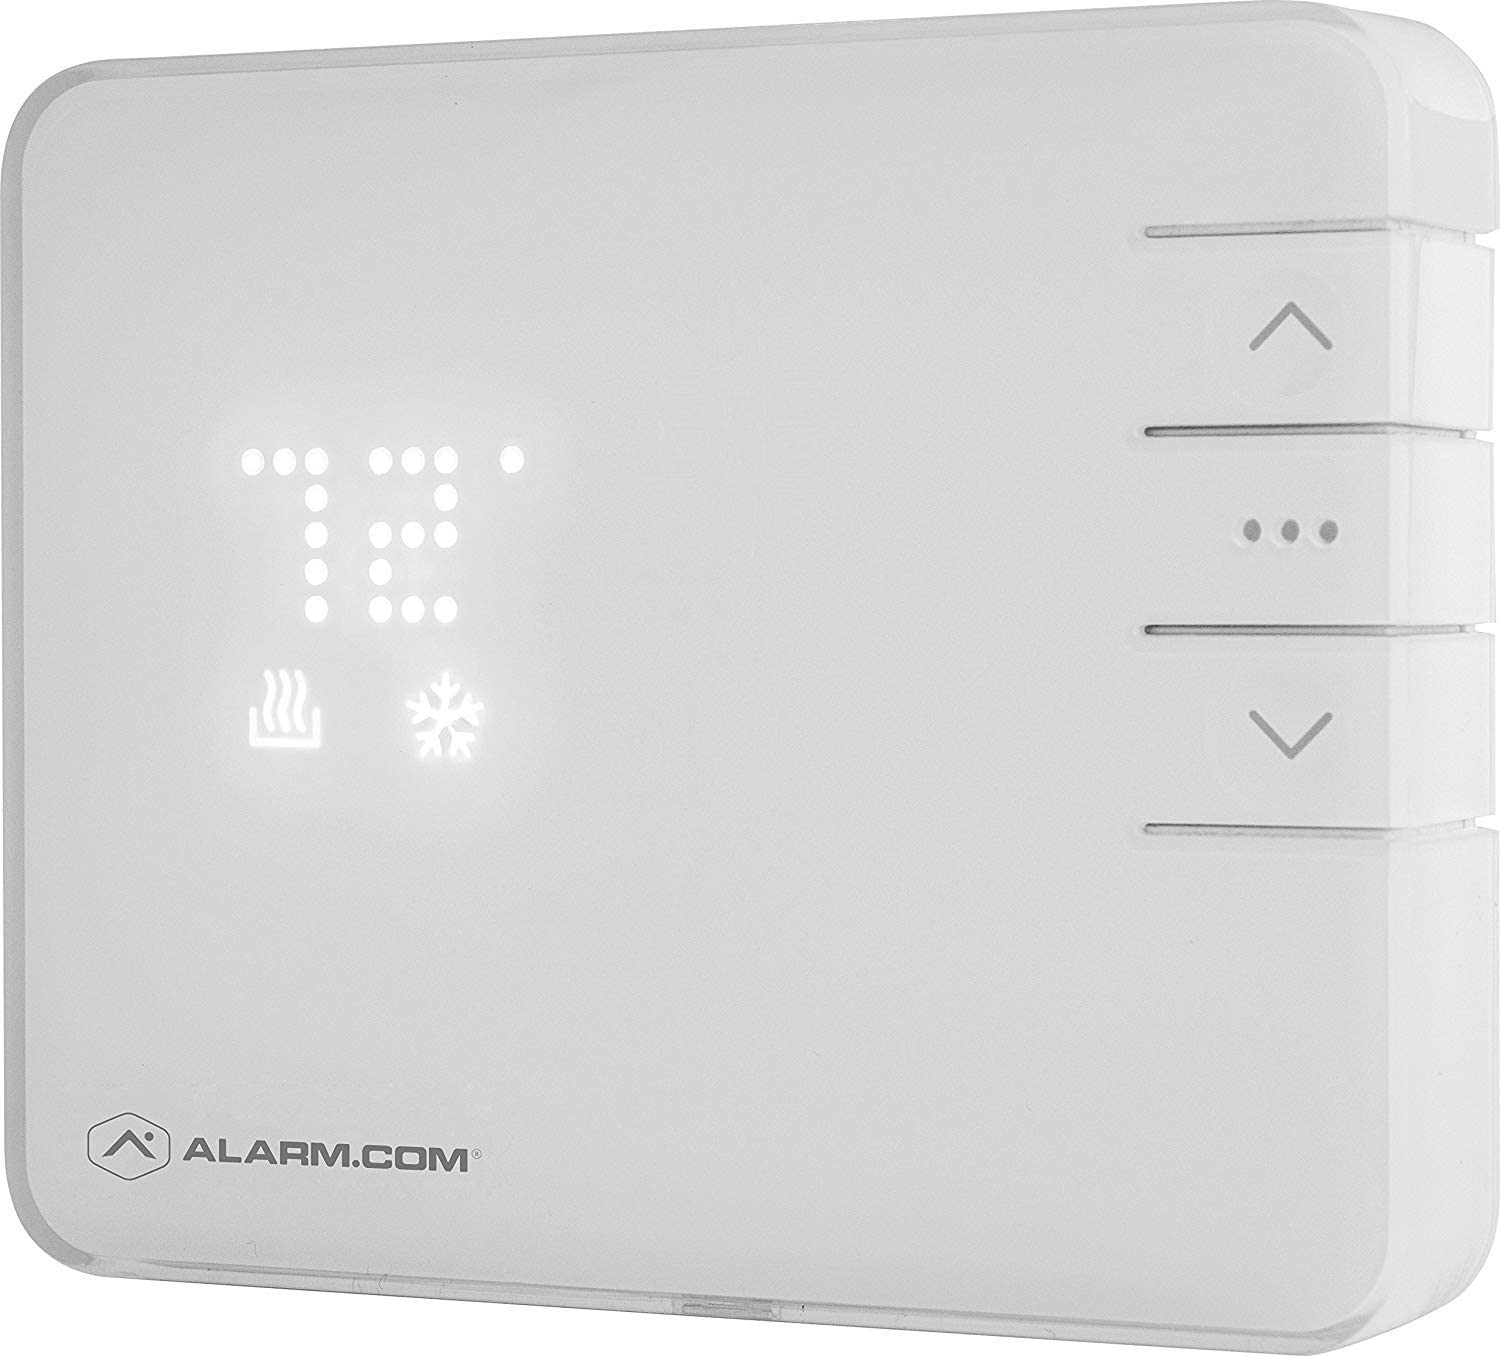 Alarm.com ADC-T2000 3-Stage Heat, 2-Stage Cooling, AA Battery Programmable Smart Thermostat, White